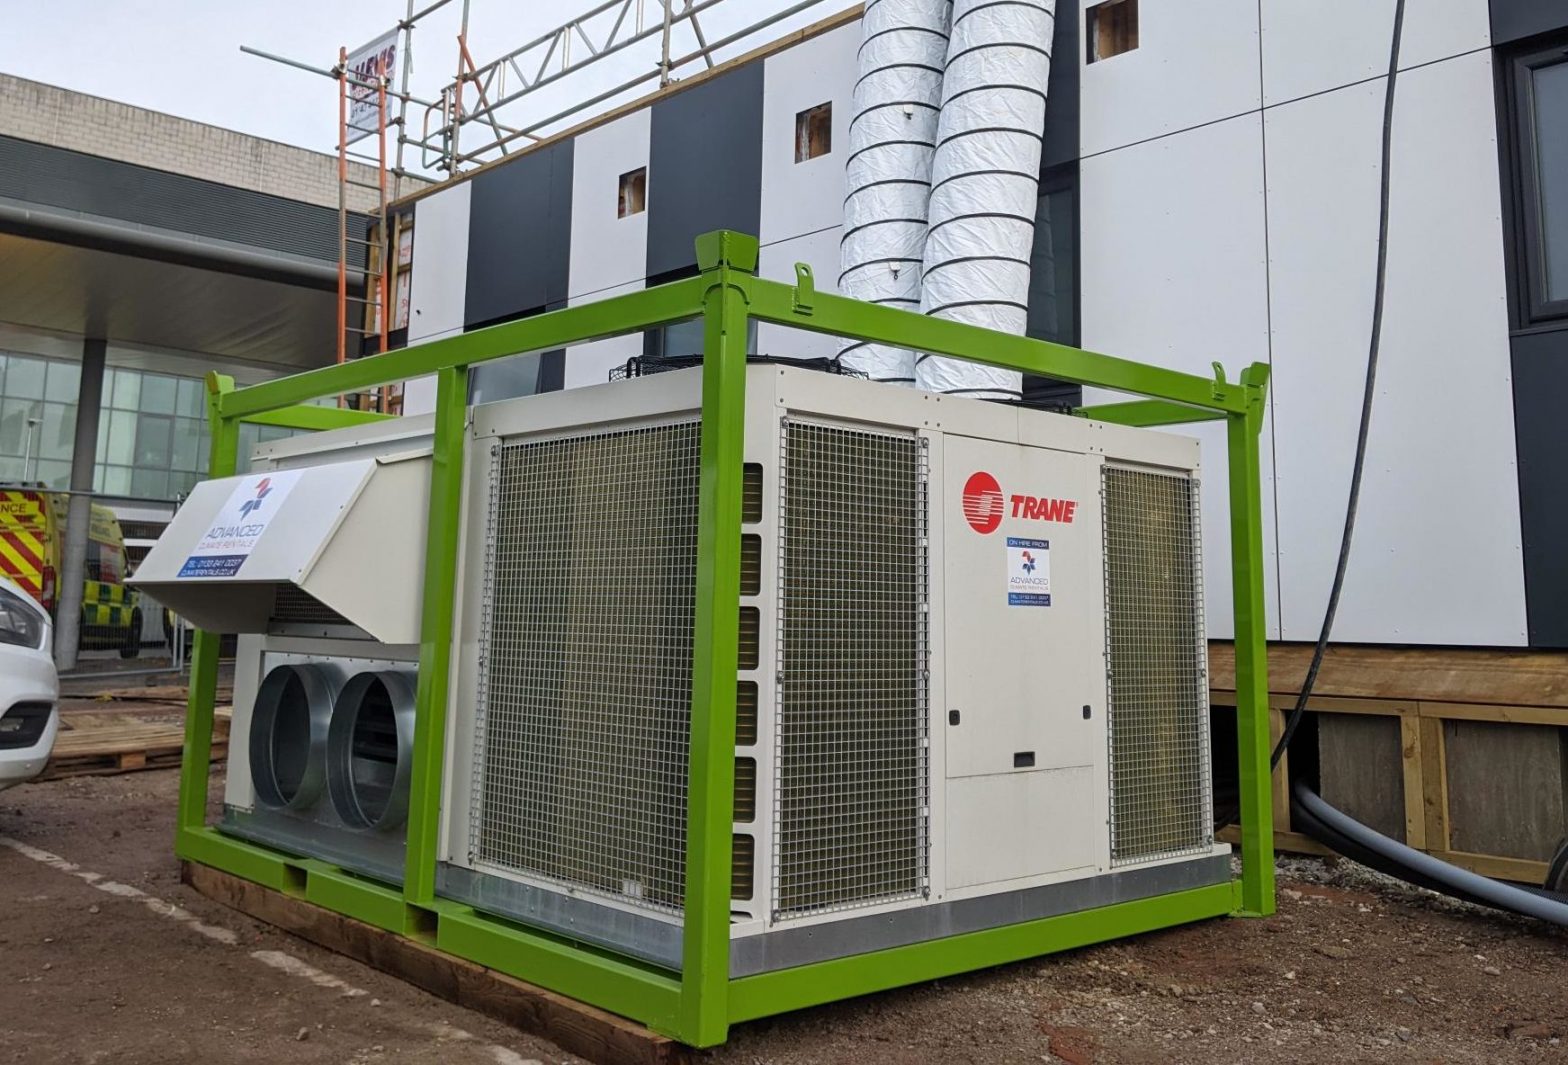 Trane Heat Pump- What Is A Heat Pump And What Are The Benefits?